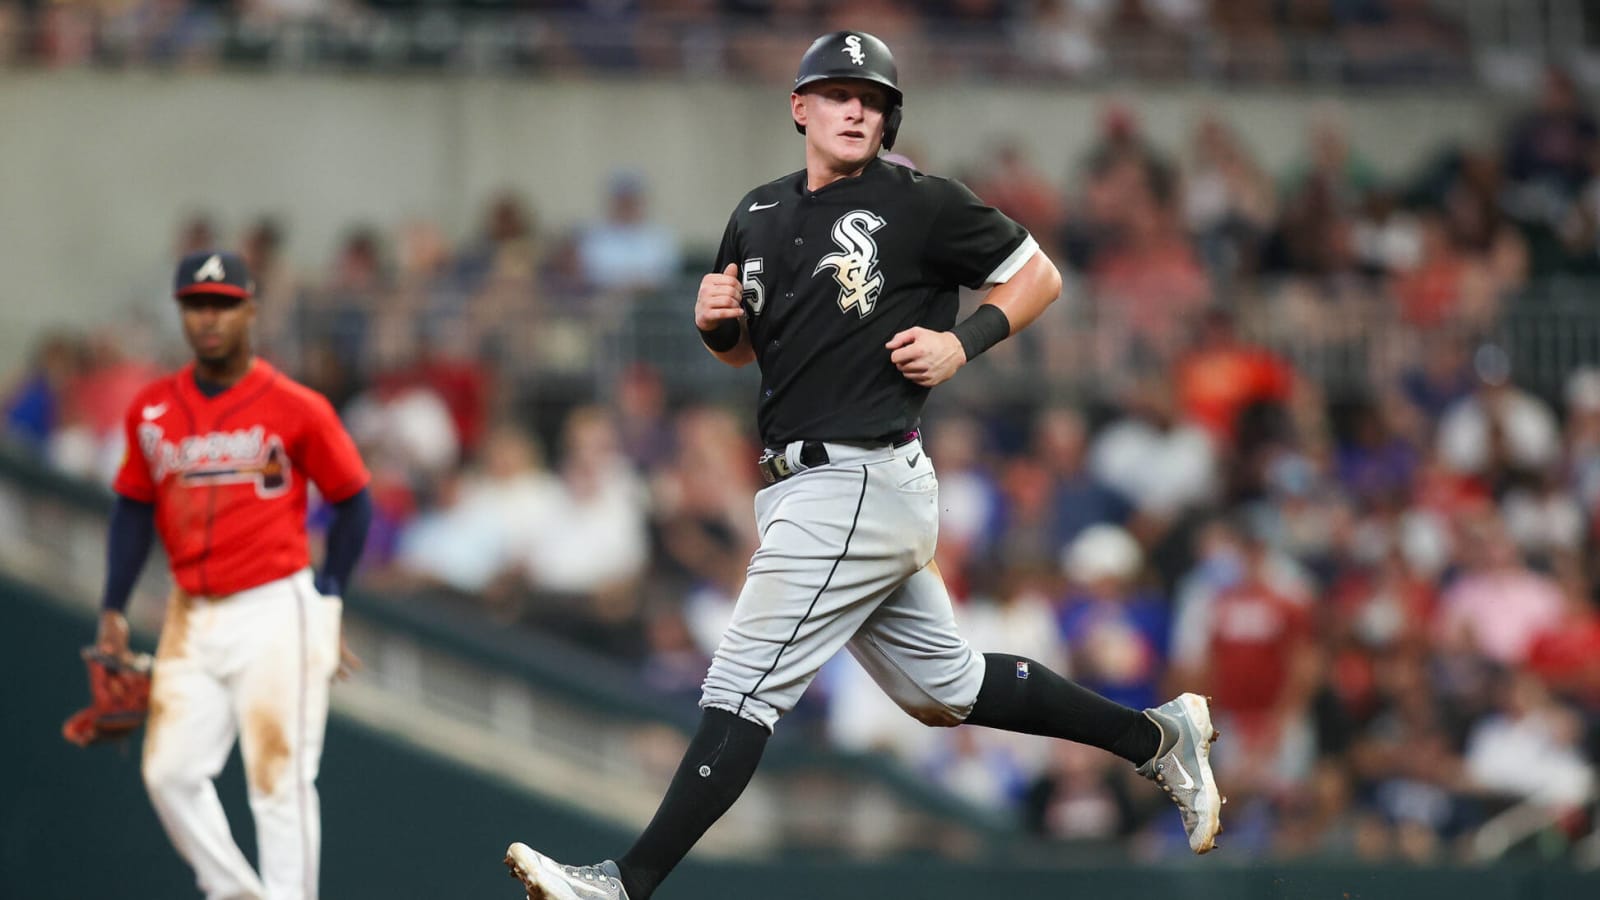 White Sox Injury Update: Andrew Vaughn Day-to-Day